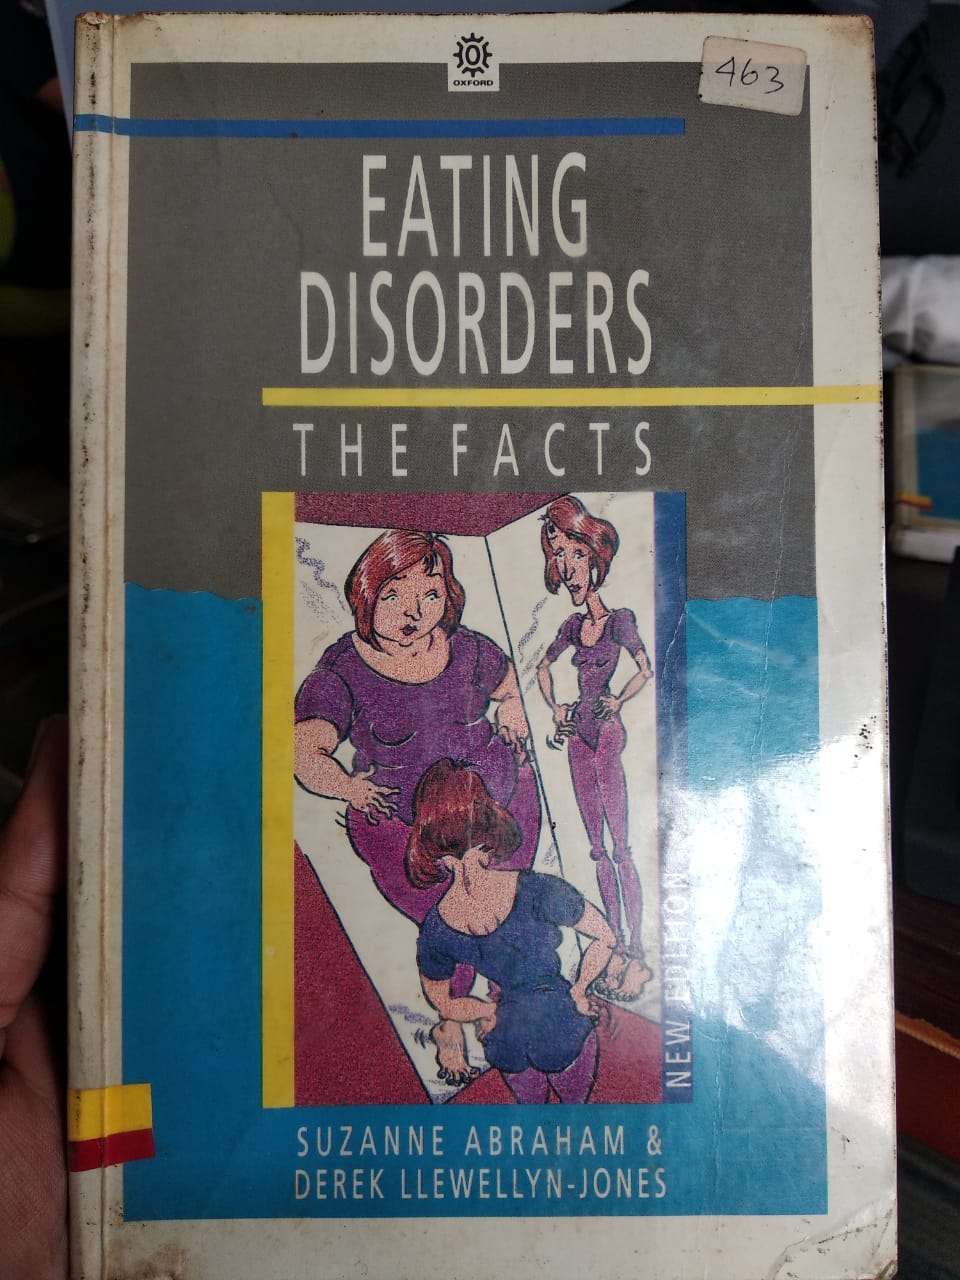 Eating disorders the facts :  New edition